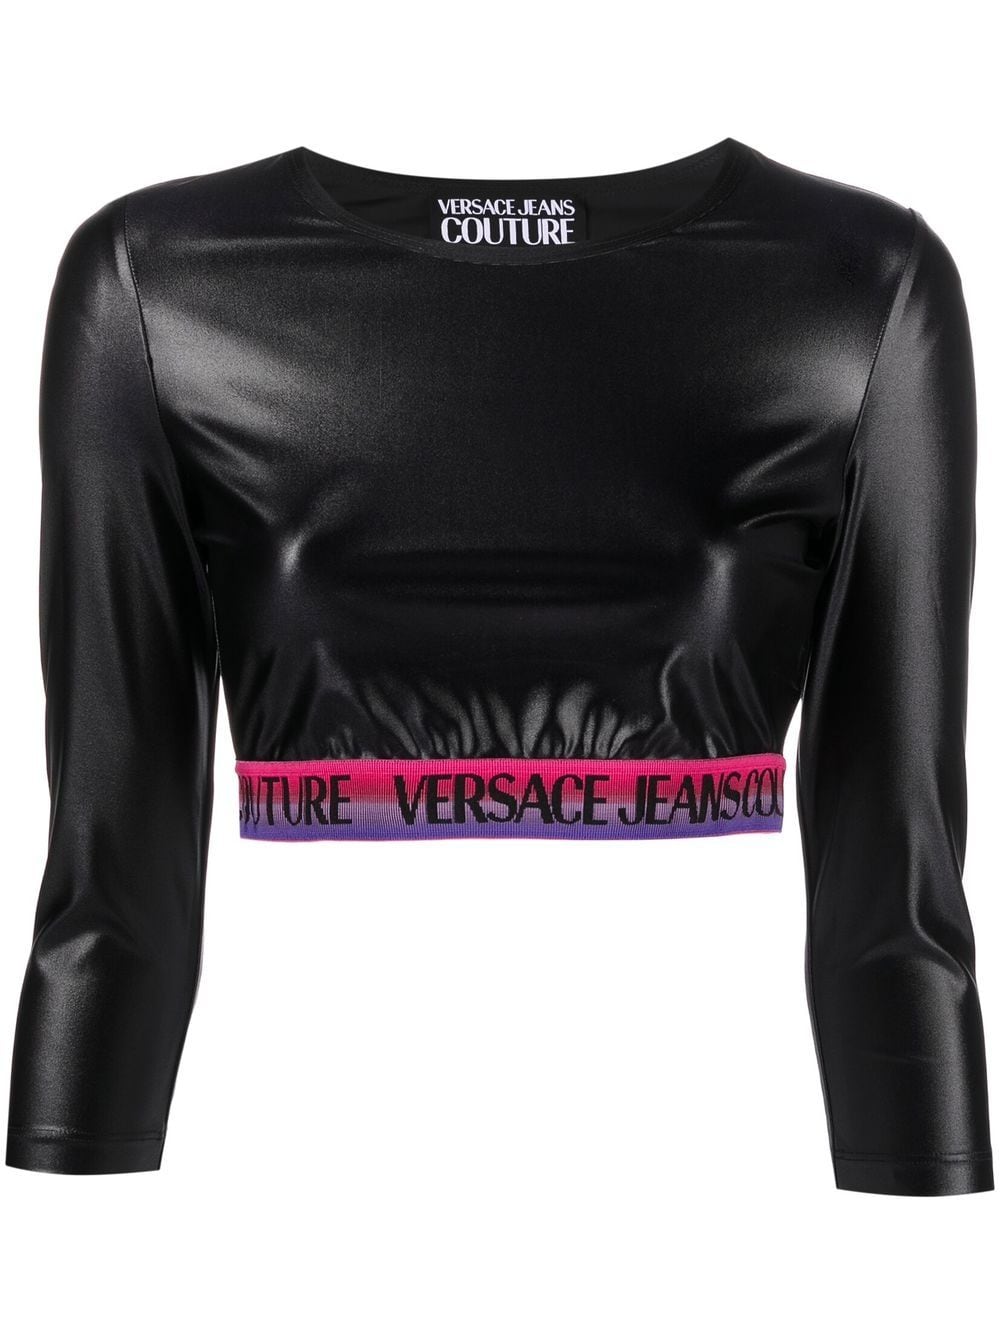 Versace Jeans Couture logo cropped top - Black von Versace Jeans Couture